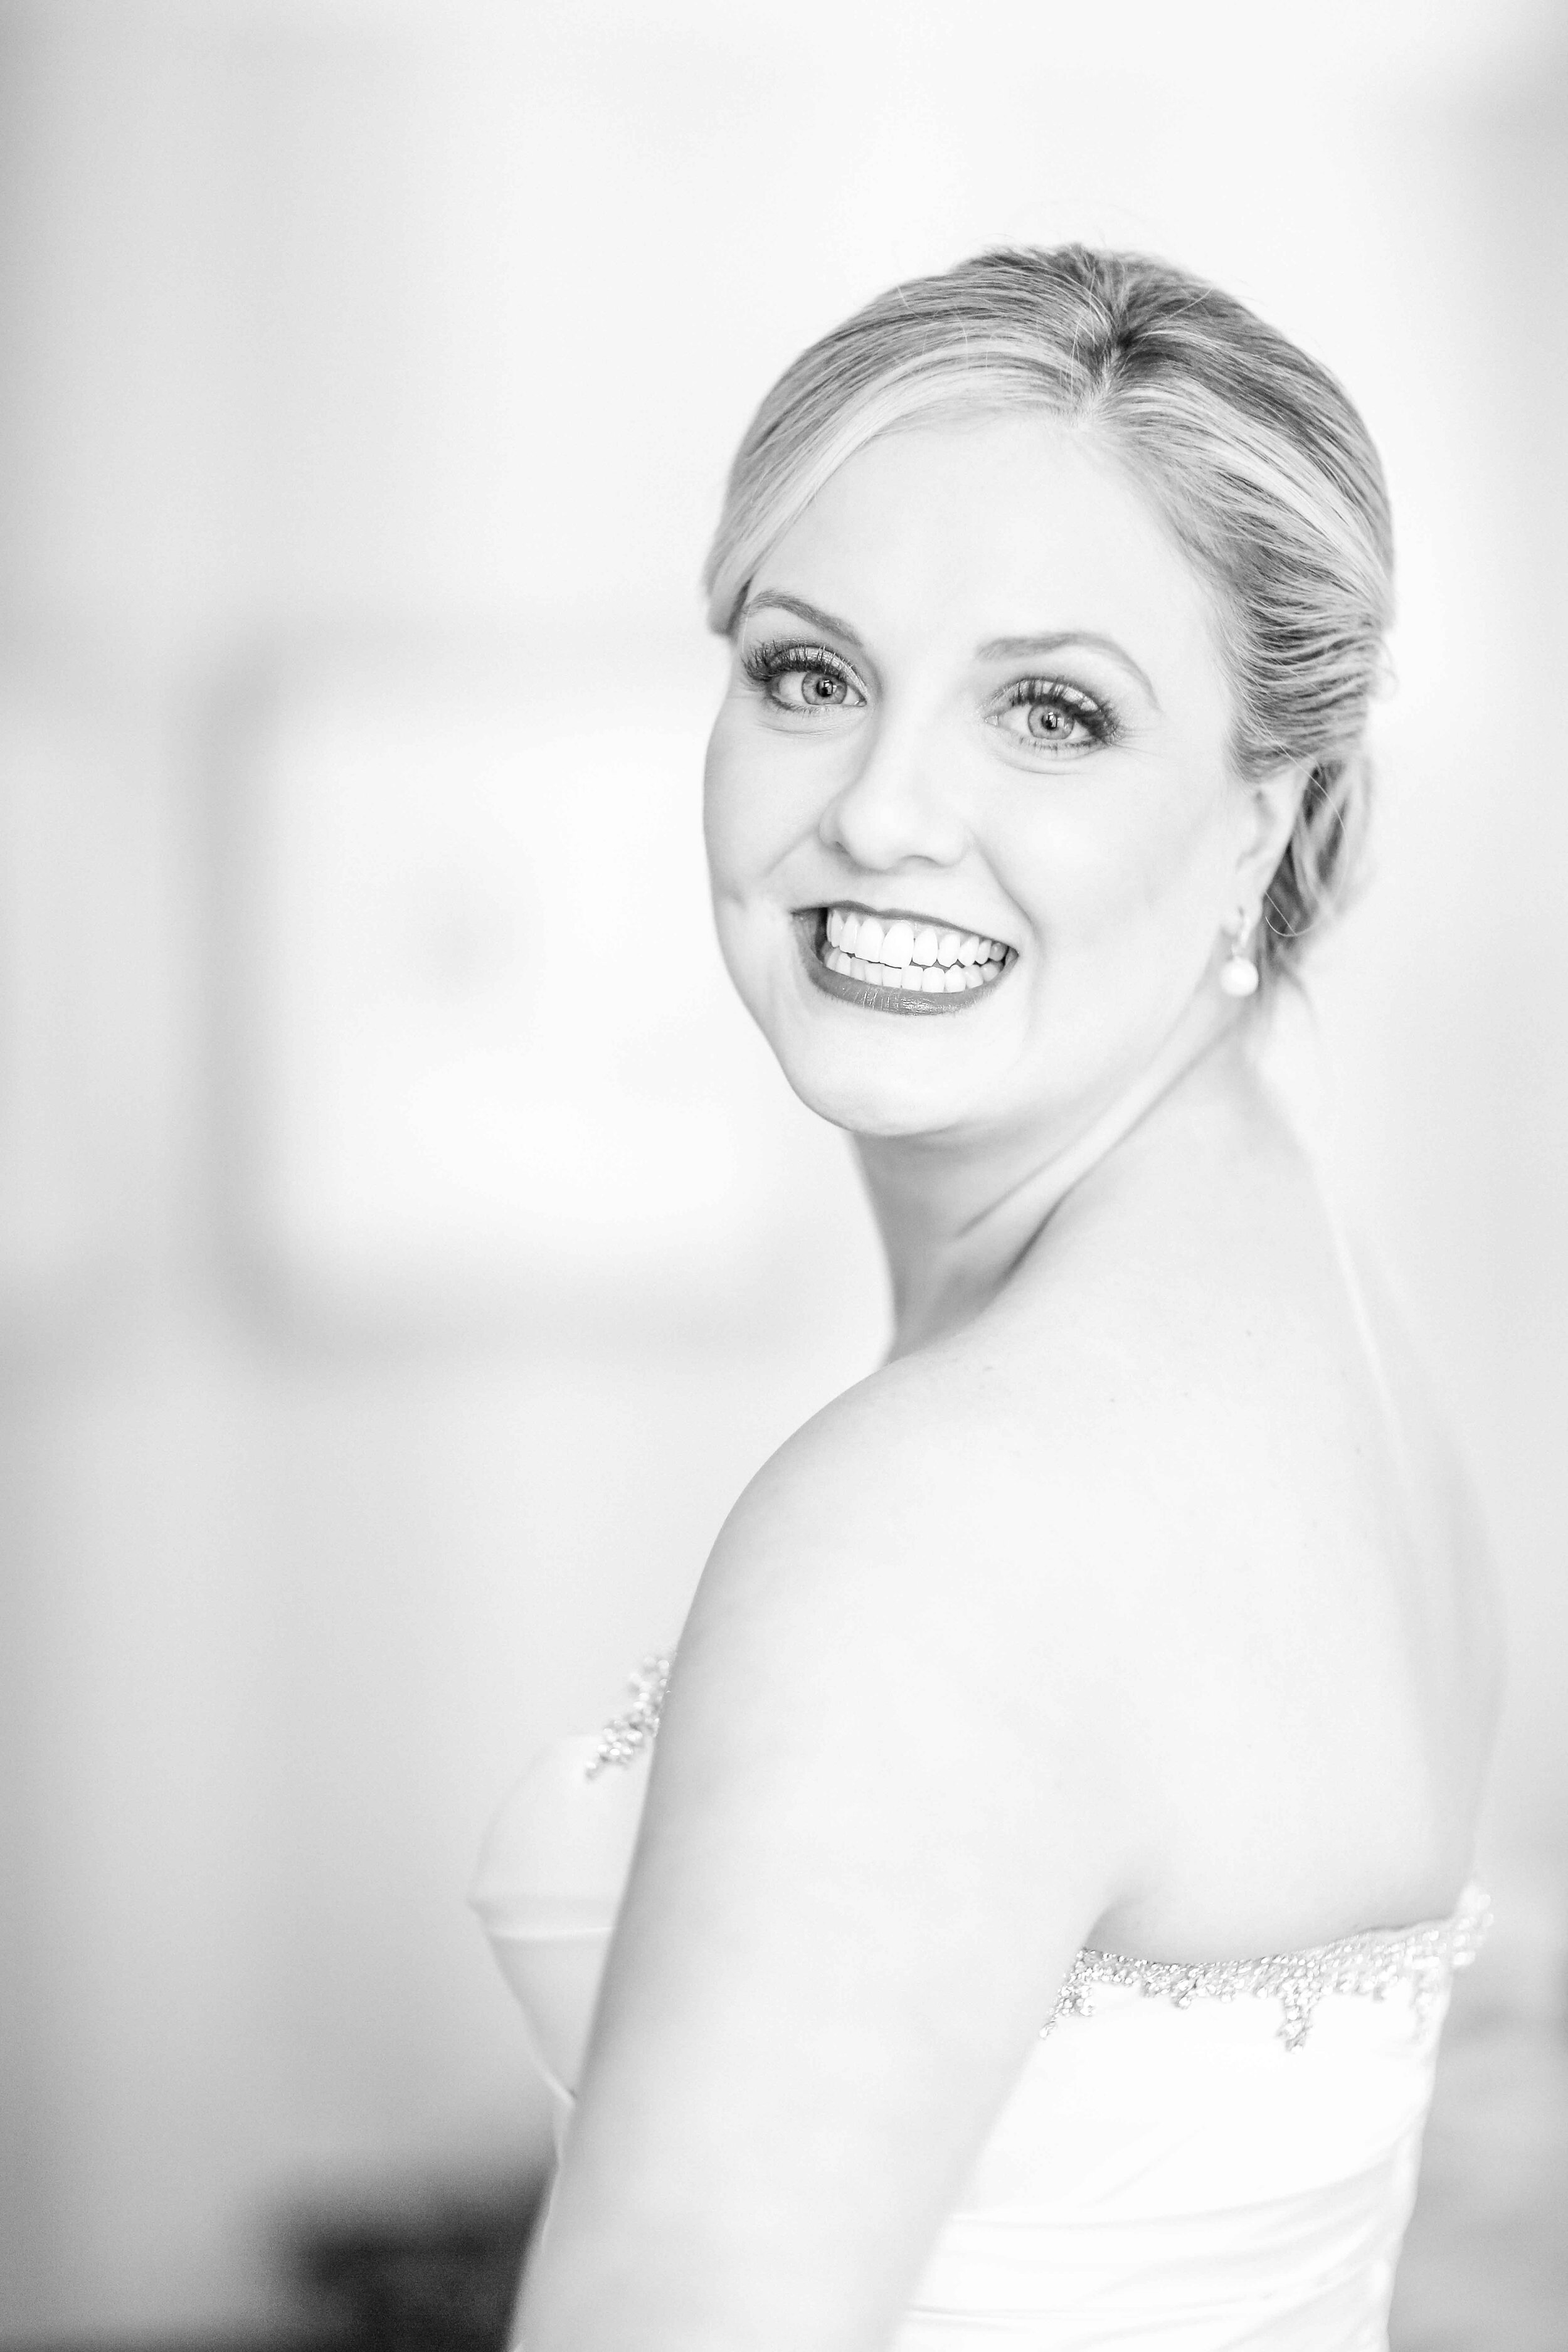 BRIDAL PORTRAIT AT A LOTTE NEW YORK PALACE HOTEL IN NYC